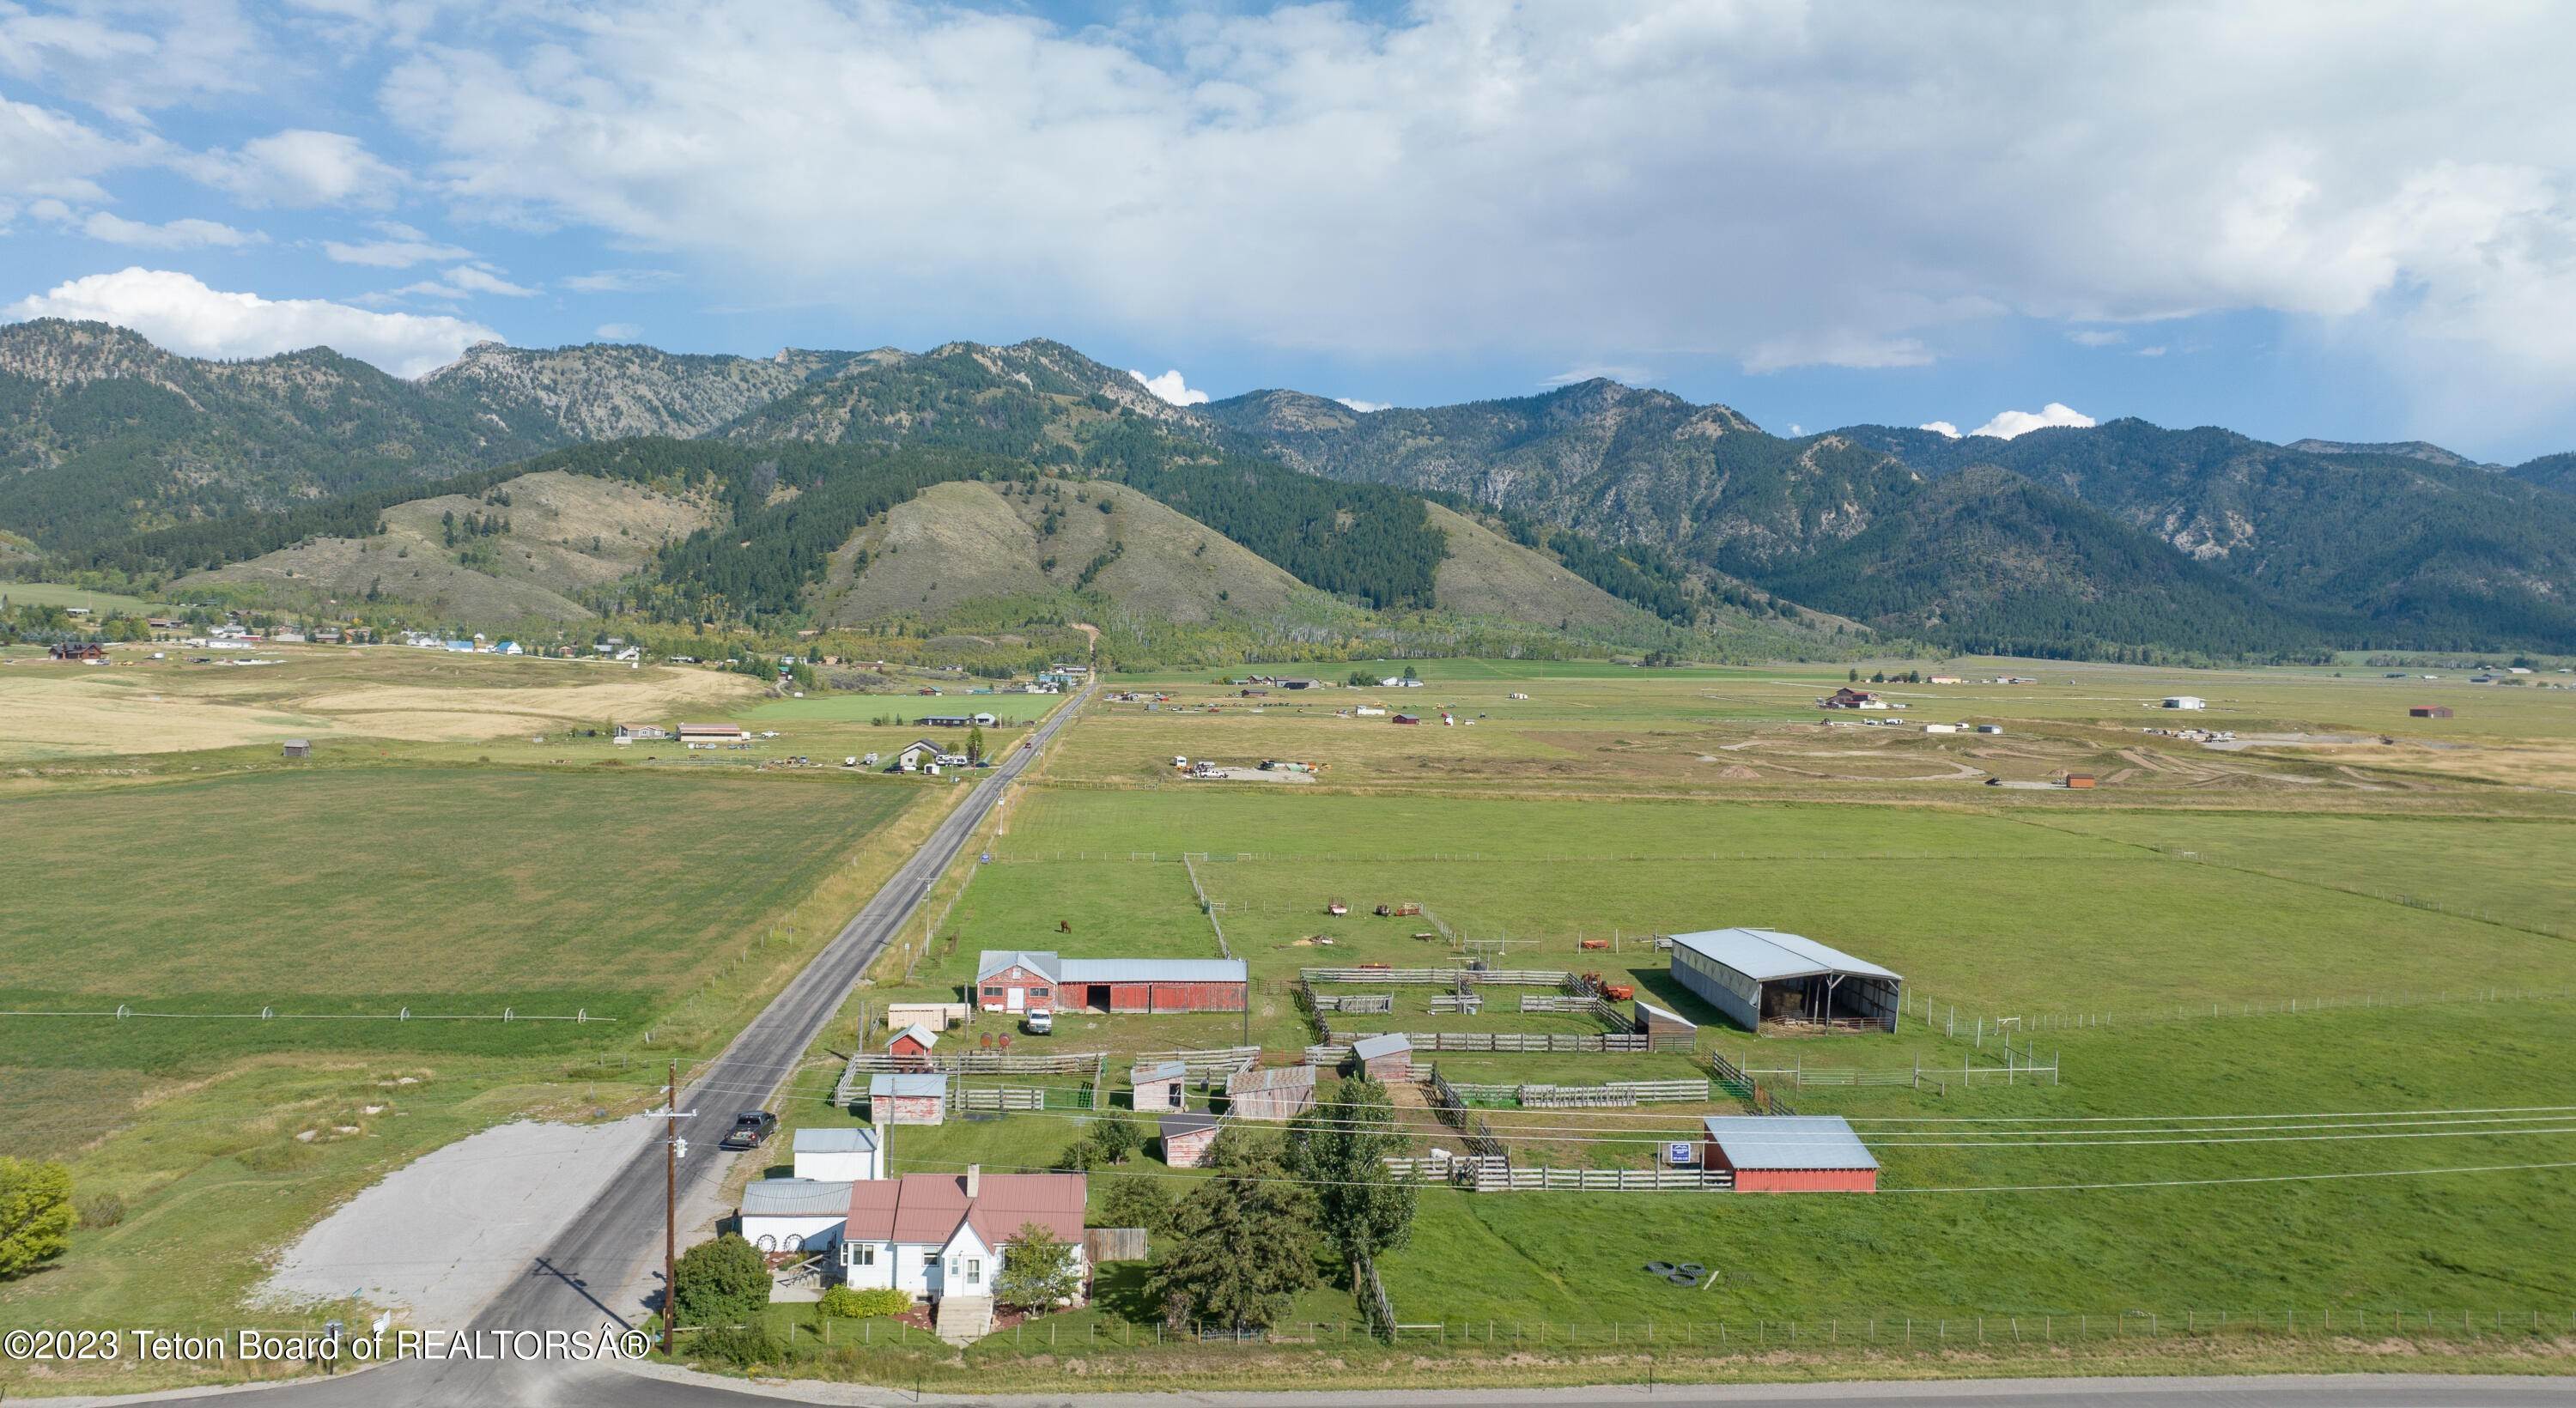 Farm and Ranch Properties for Sale at 20 COUNTY ROAD 107 20 COUNTY ROAD 107 Etna, Wyoming 83118 United States